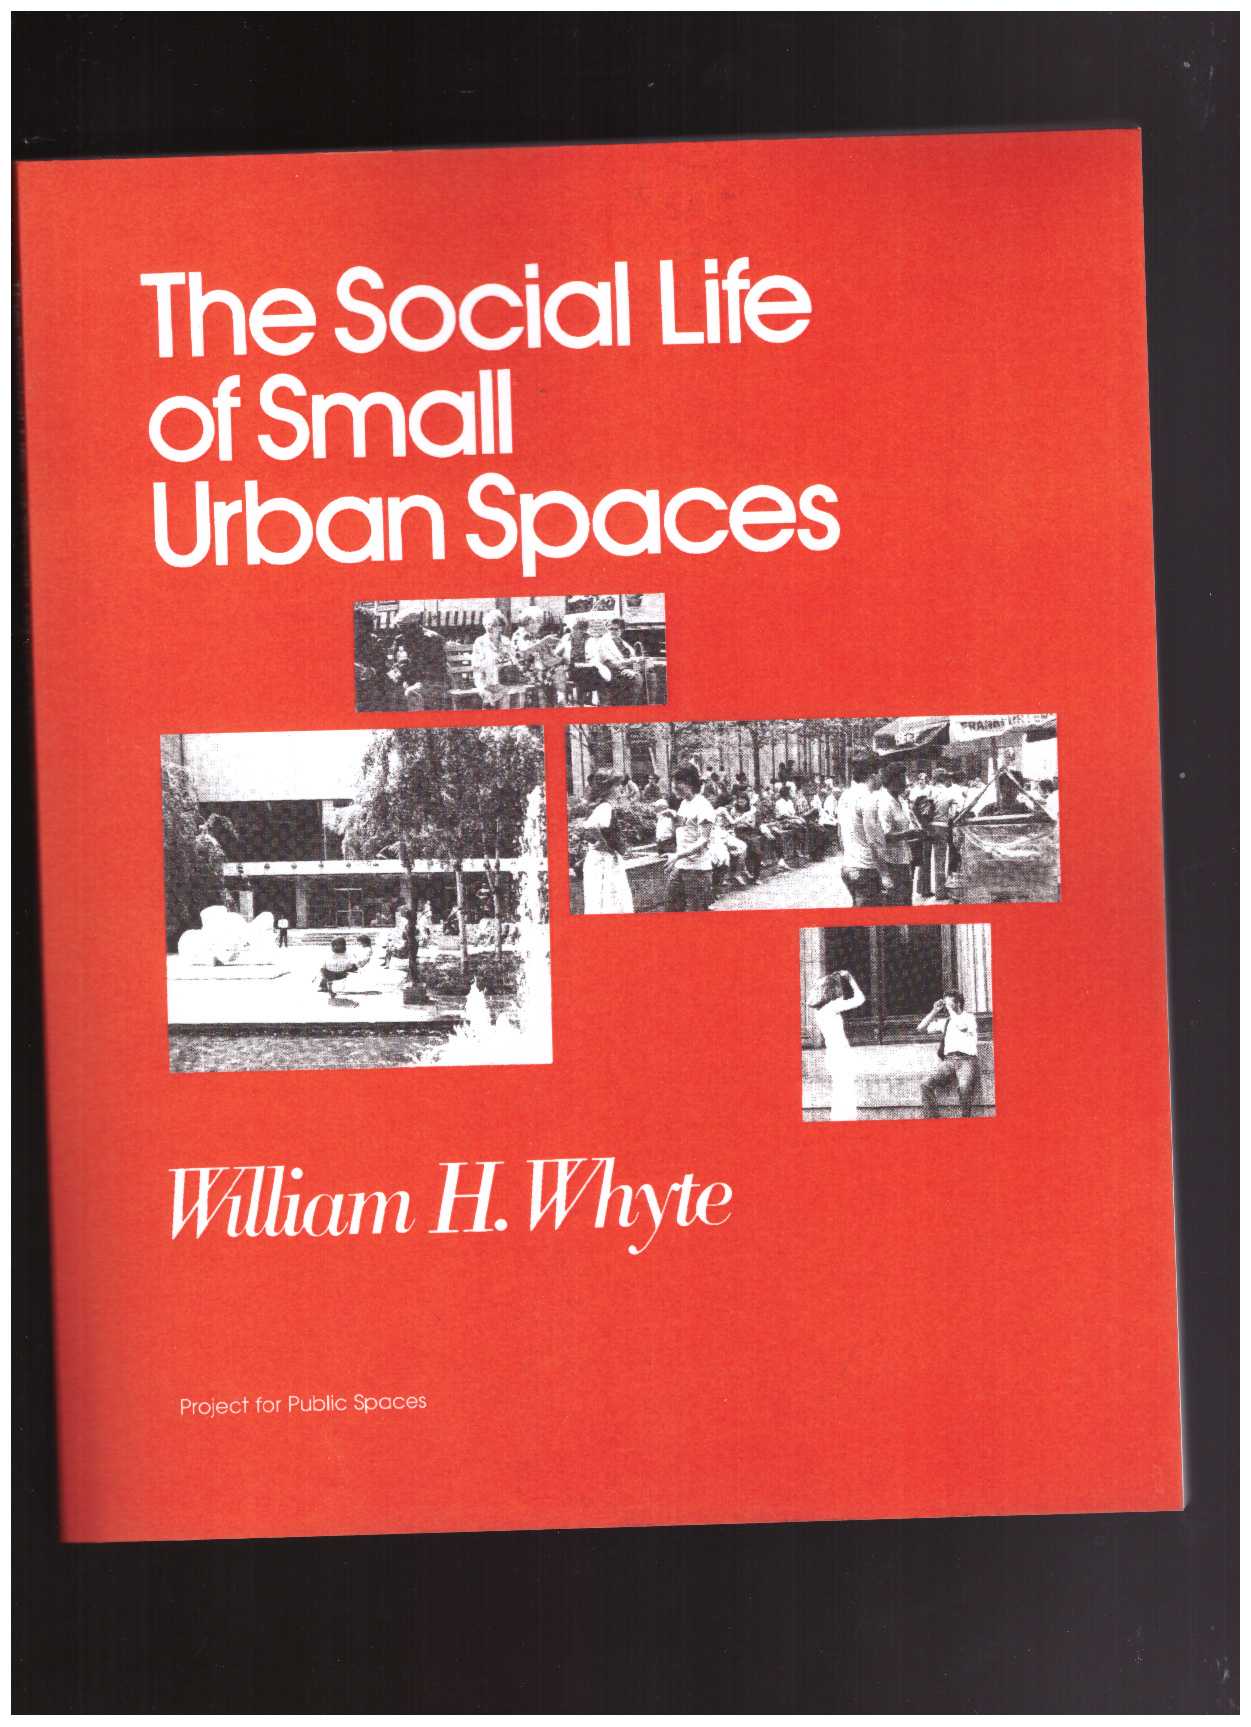 WHITE, William H. - The Social Life of Small Urban Spaces